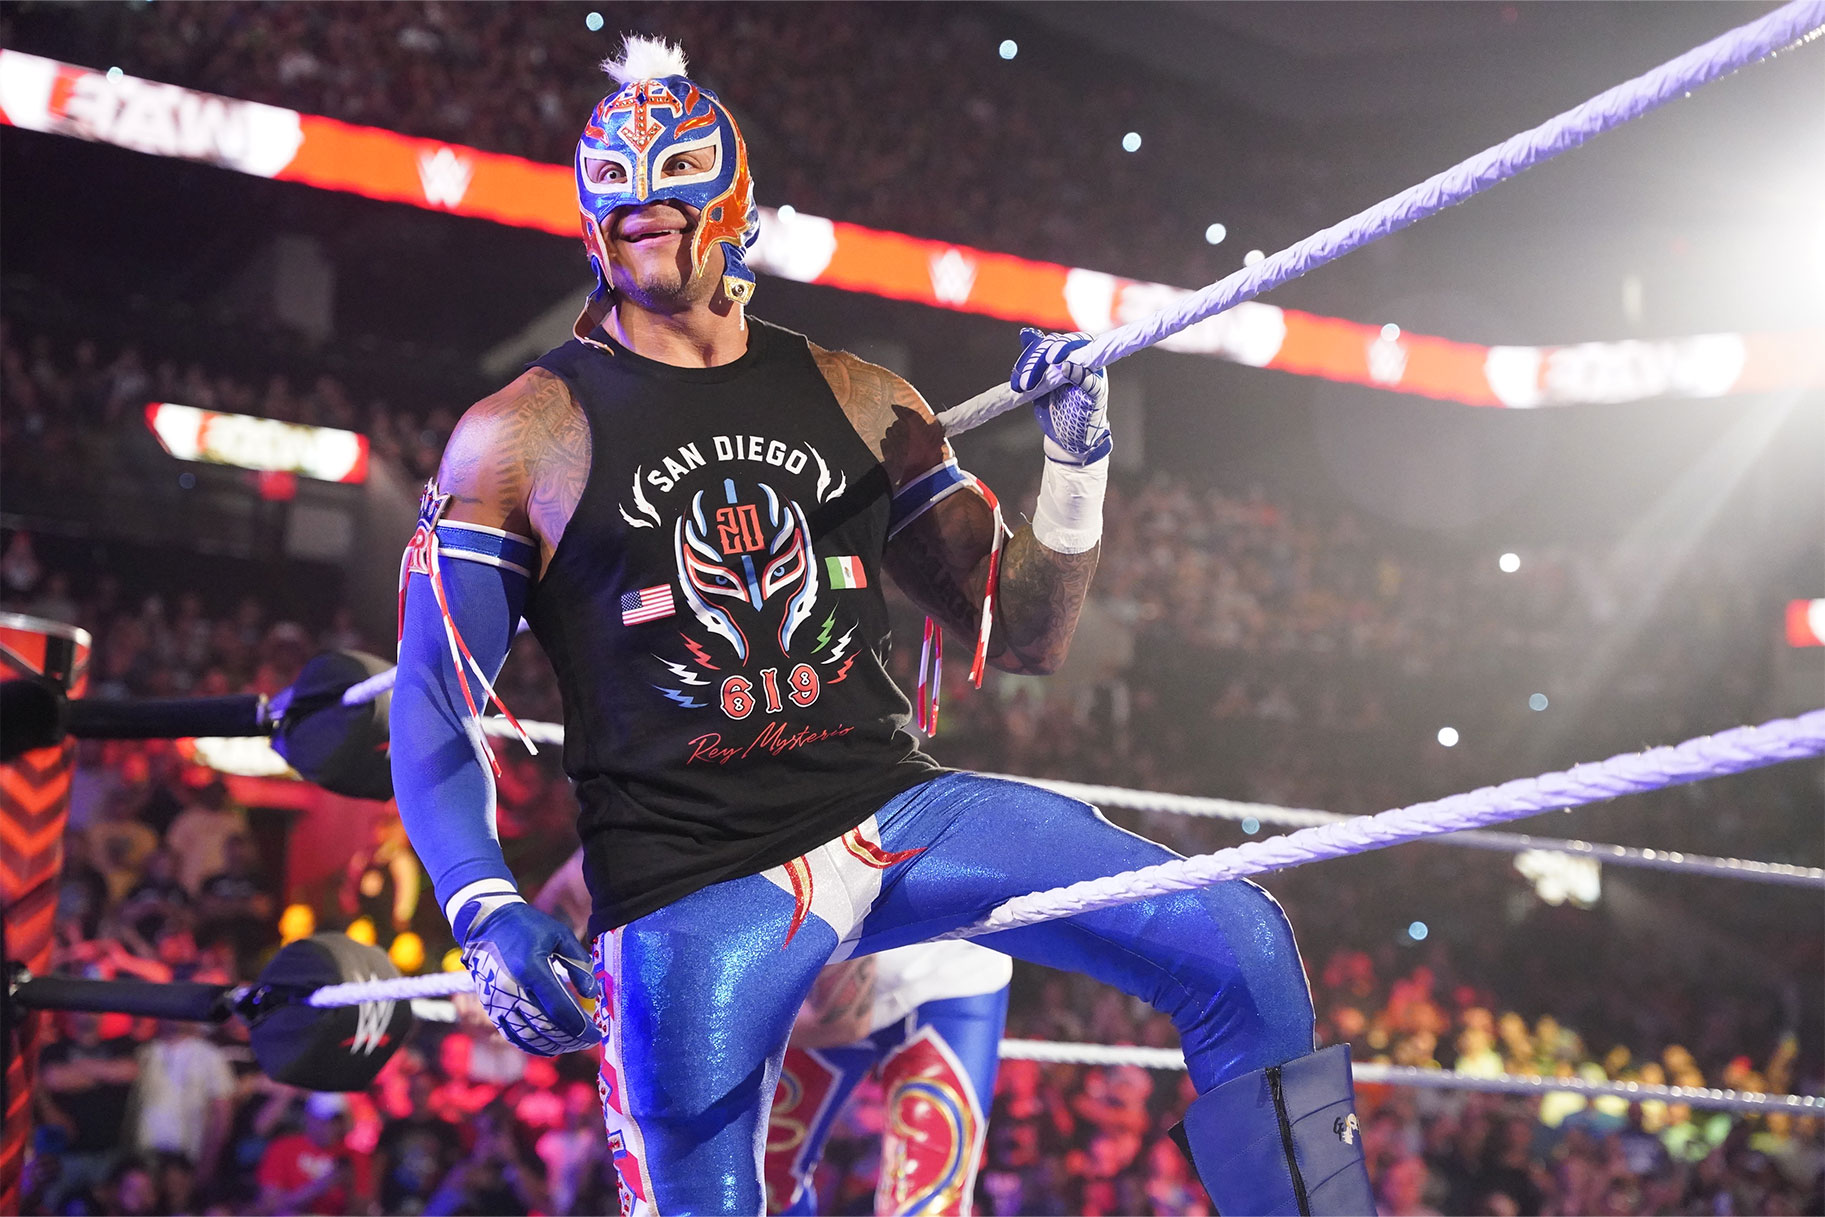 Rey Mysterio leaning on the ropes of the ring